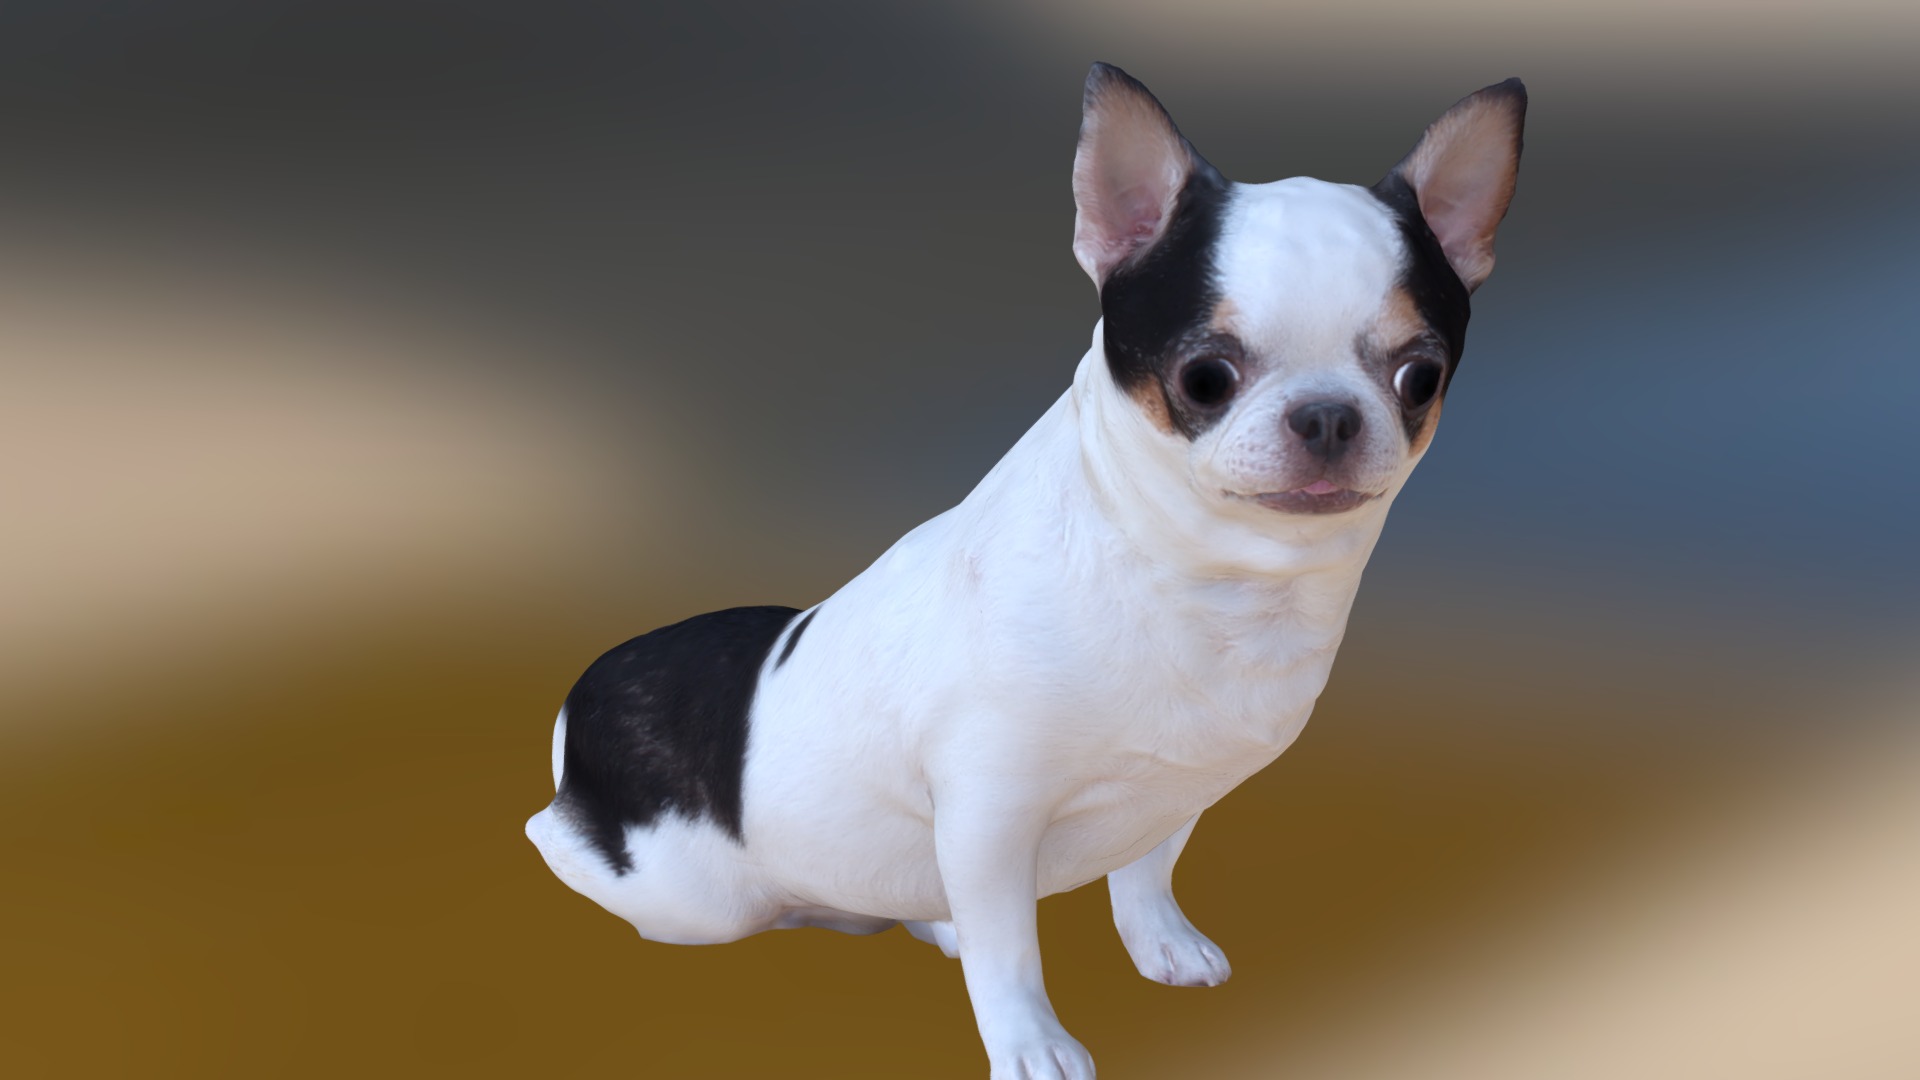 3D model Scanned Chihuahua Dog-888 - This is a 3D model of the Scanned Chihuahua Dog-888. The 3D model is about a dog with a black and white face.